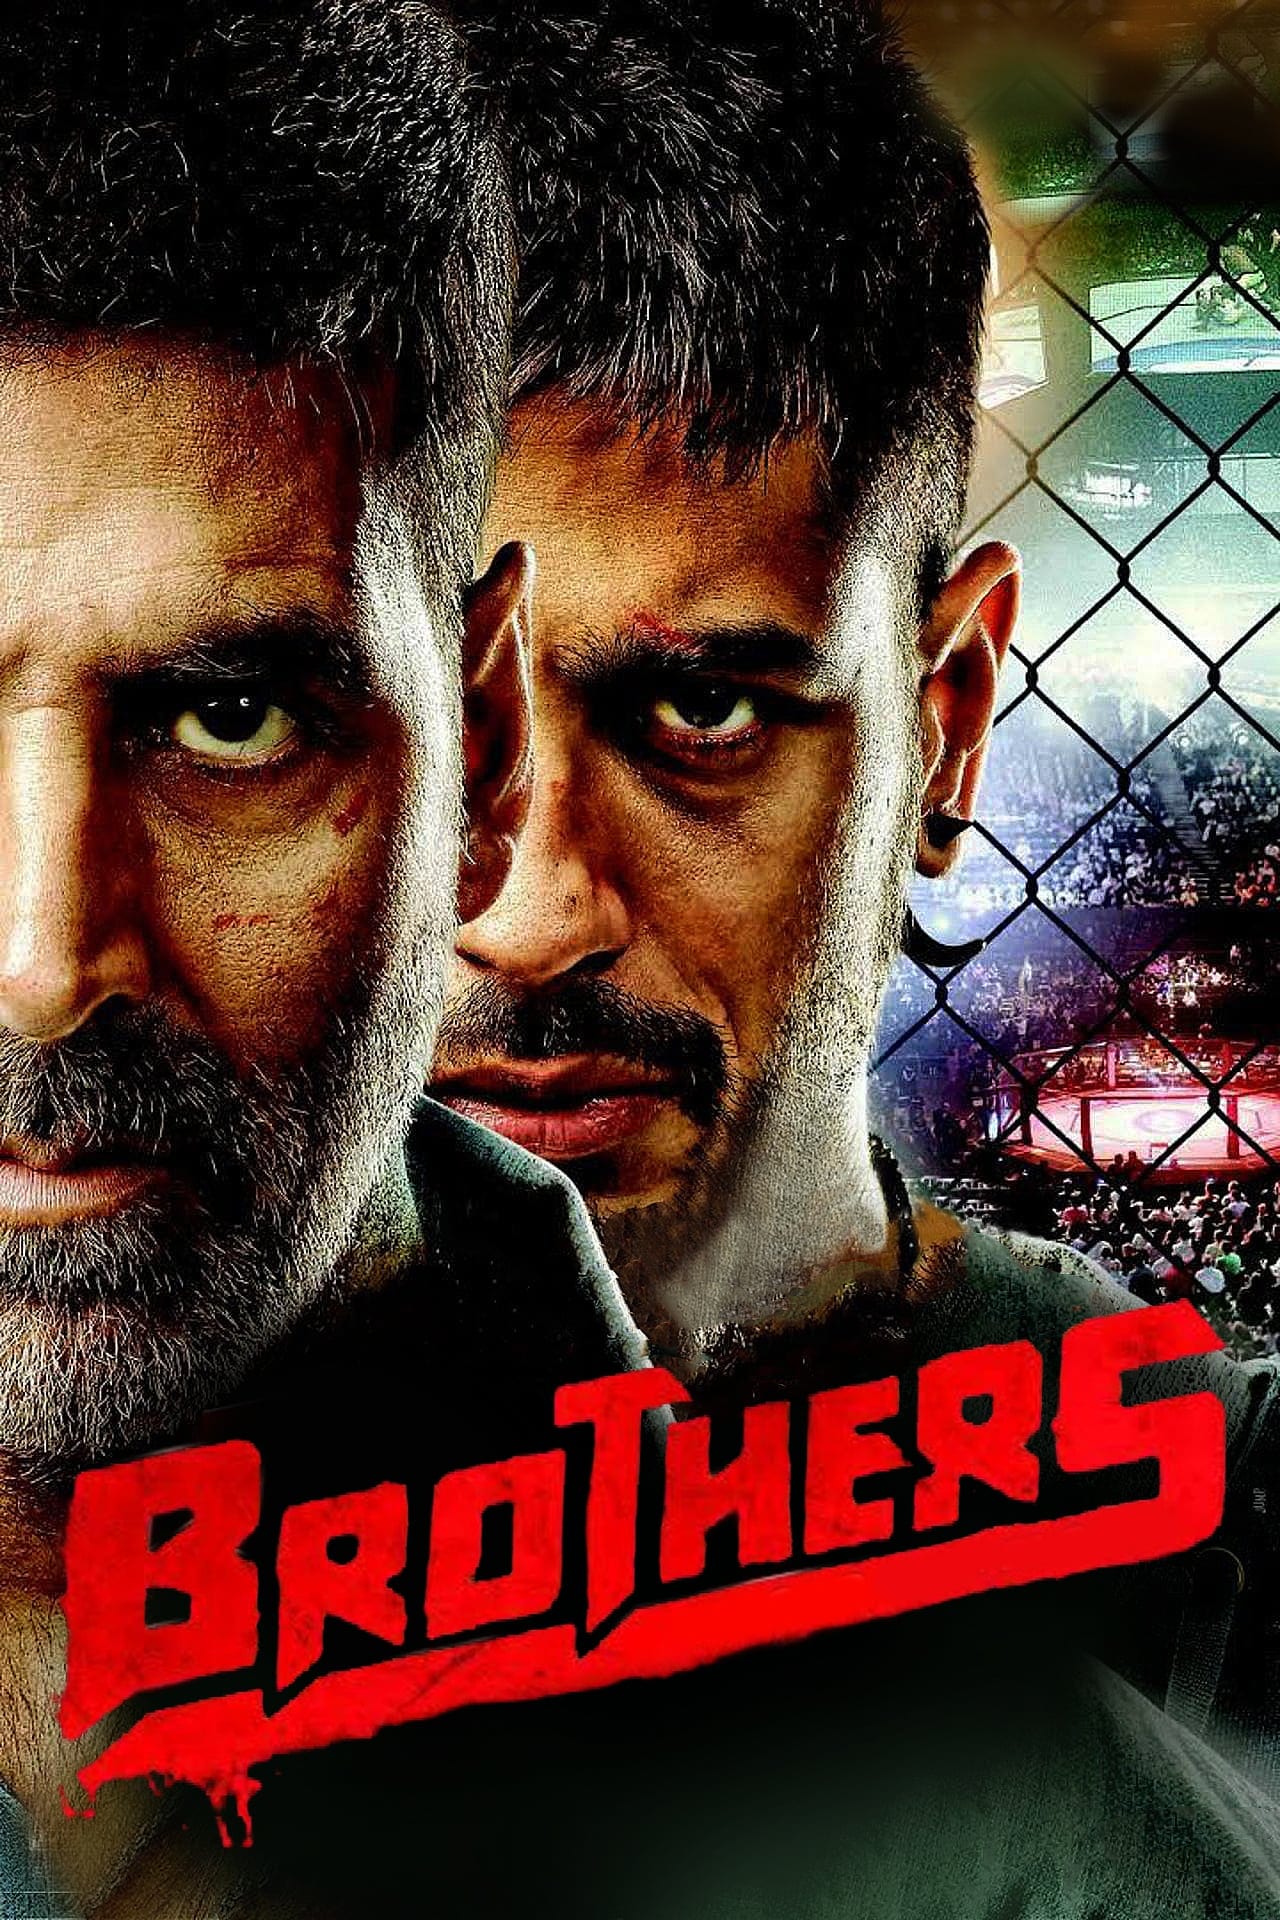 Image from the movie "Brothers"